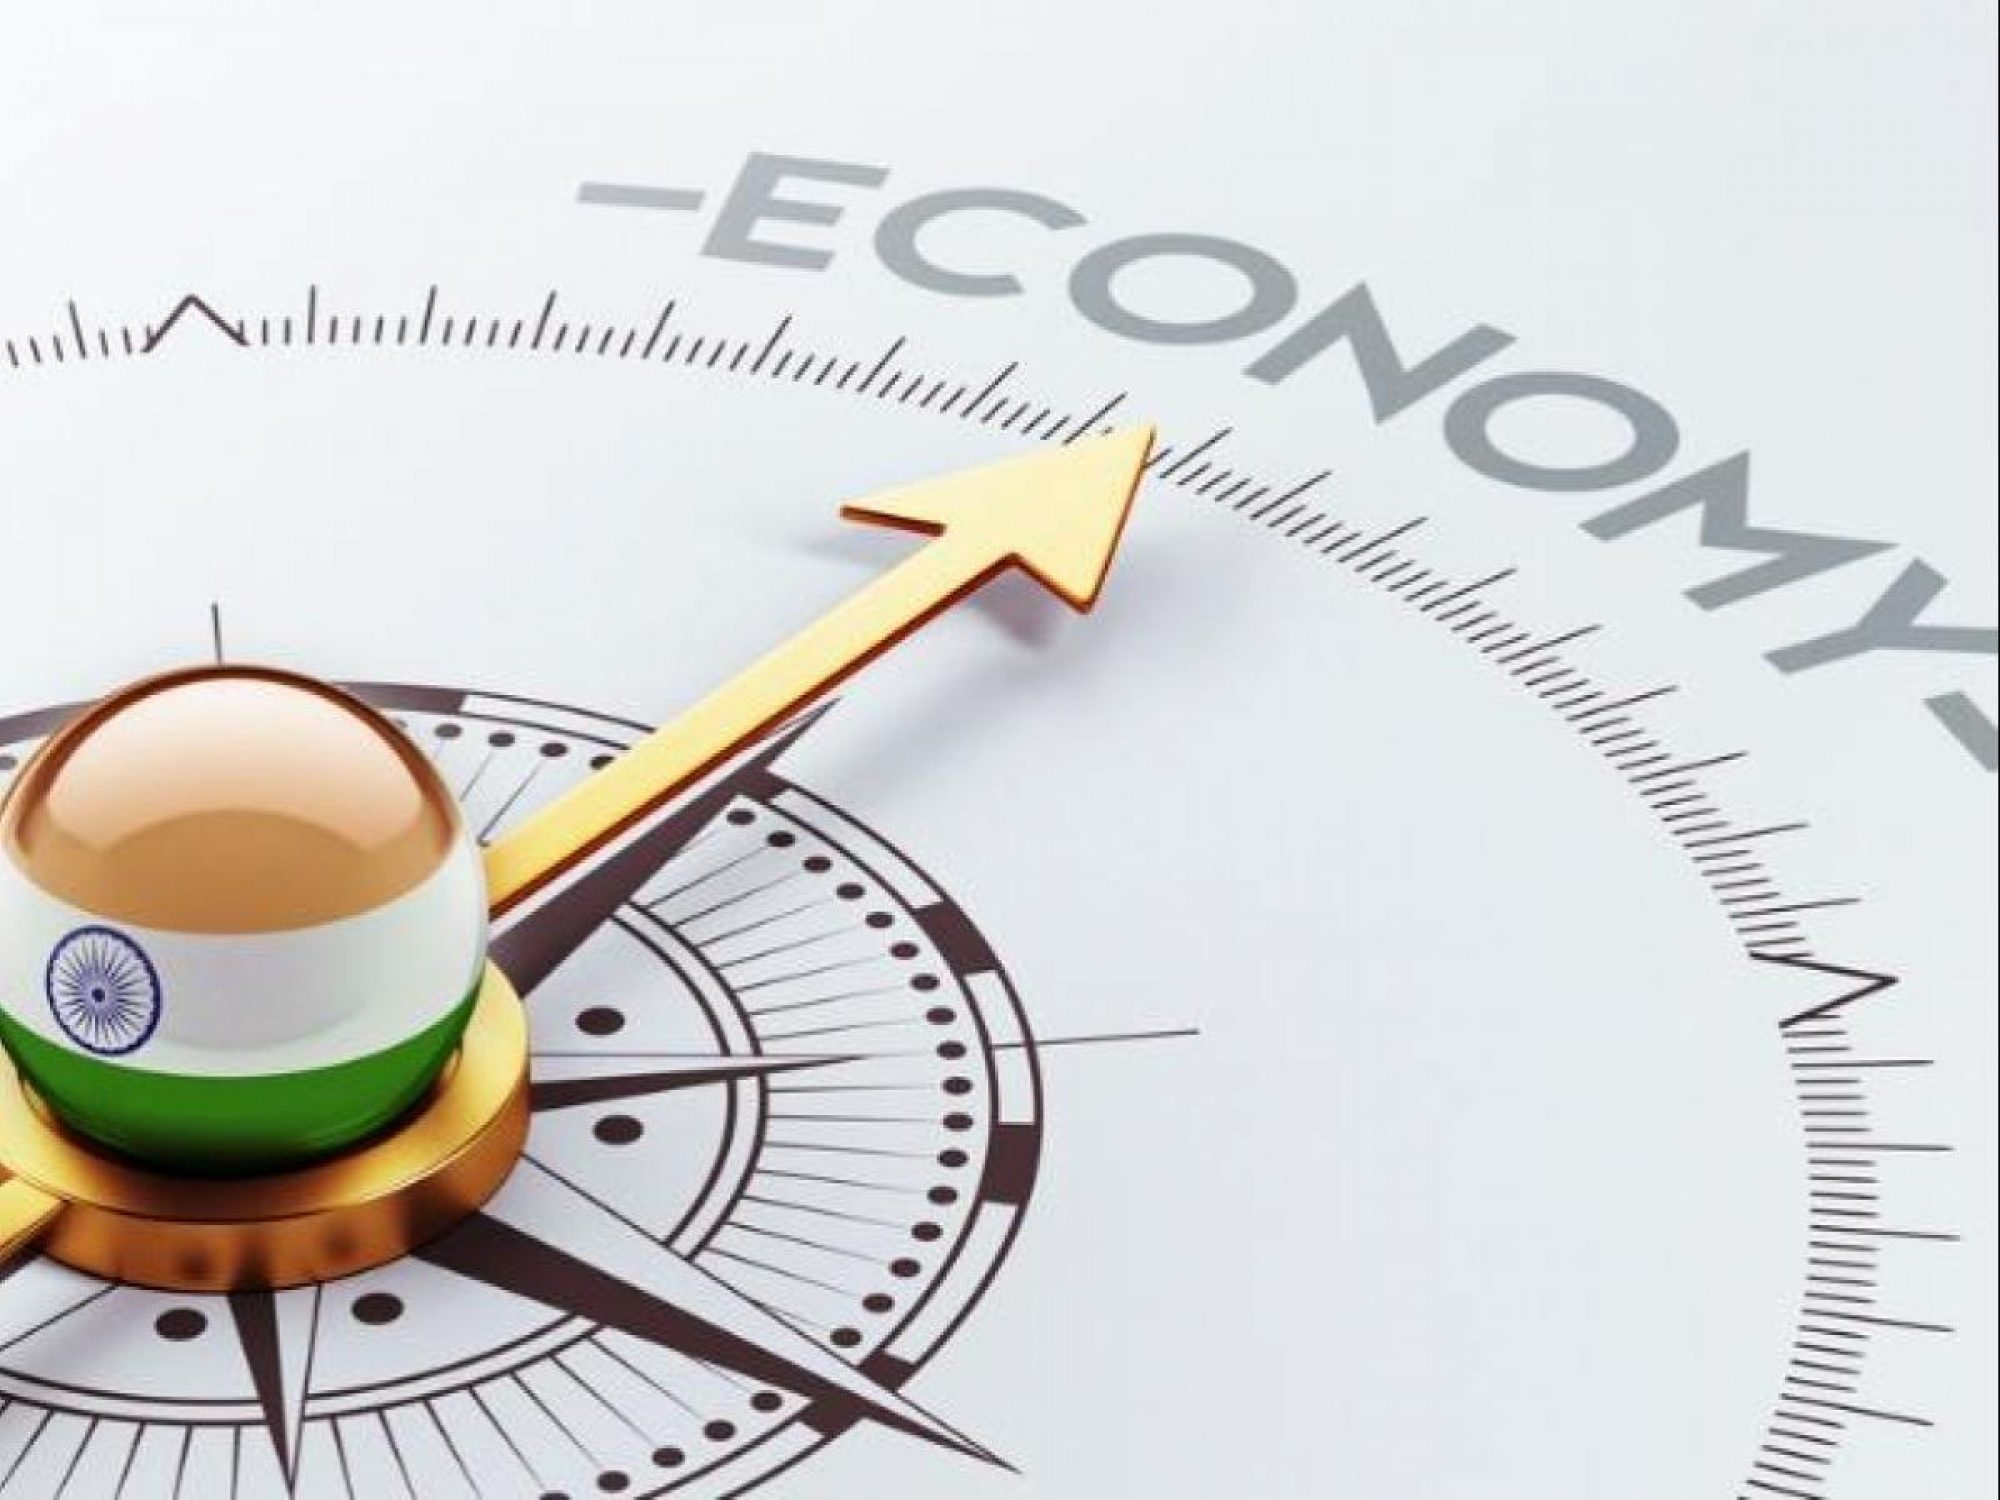 Economic slowdown of the third largest economy of the world, can it realise the double digit growth rate?